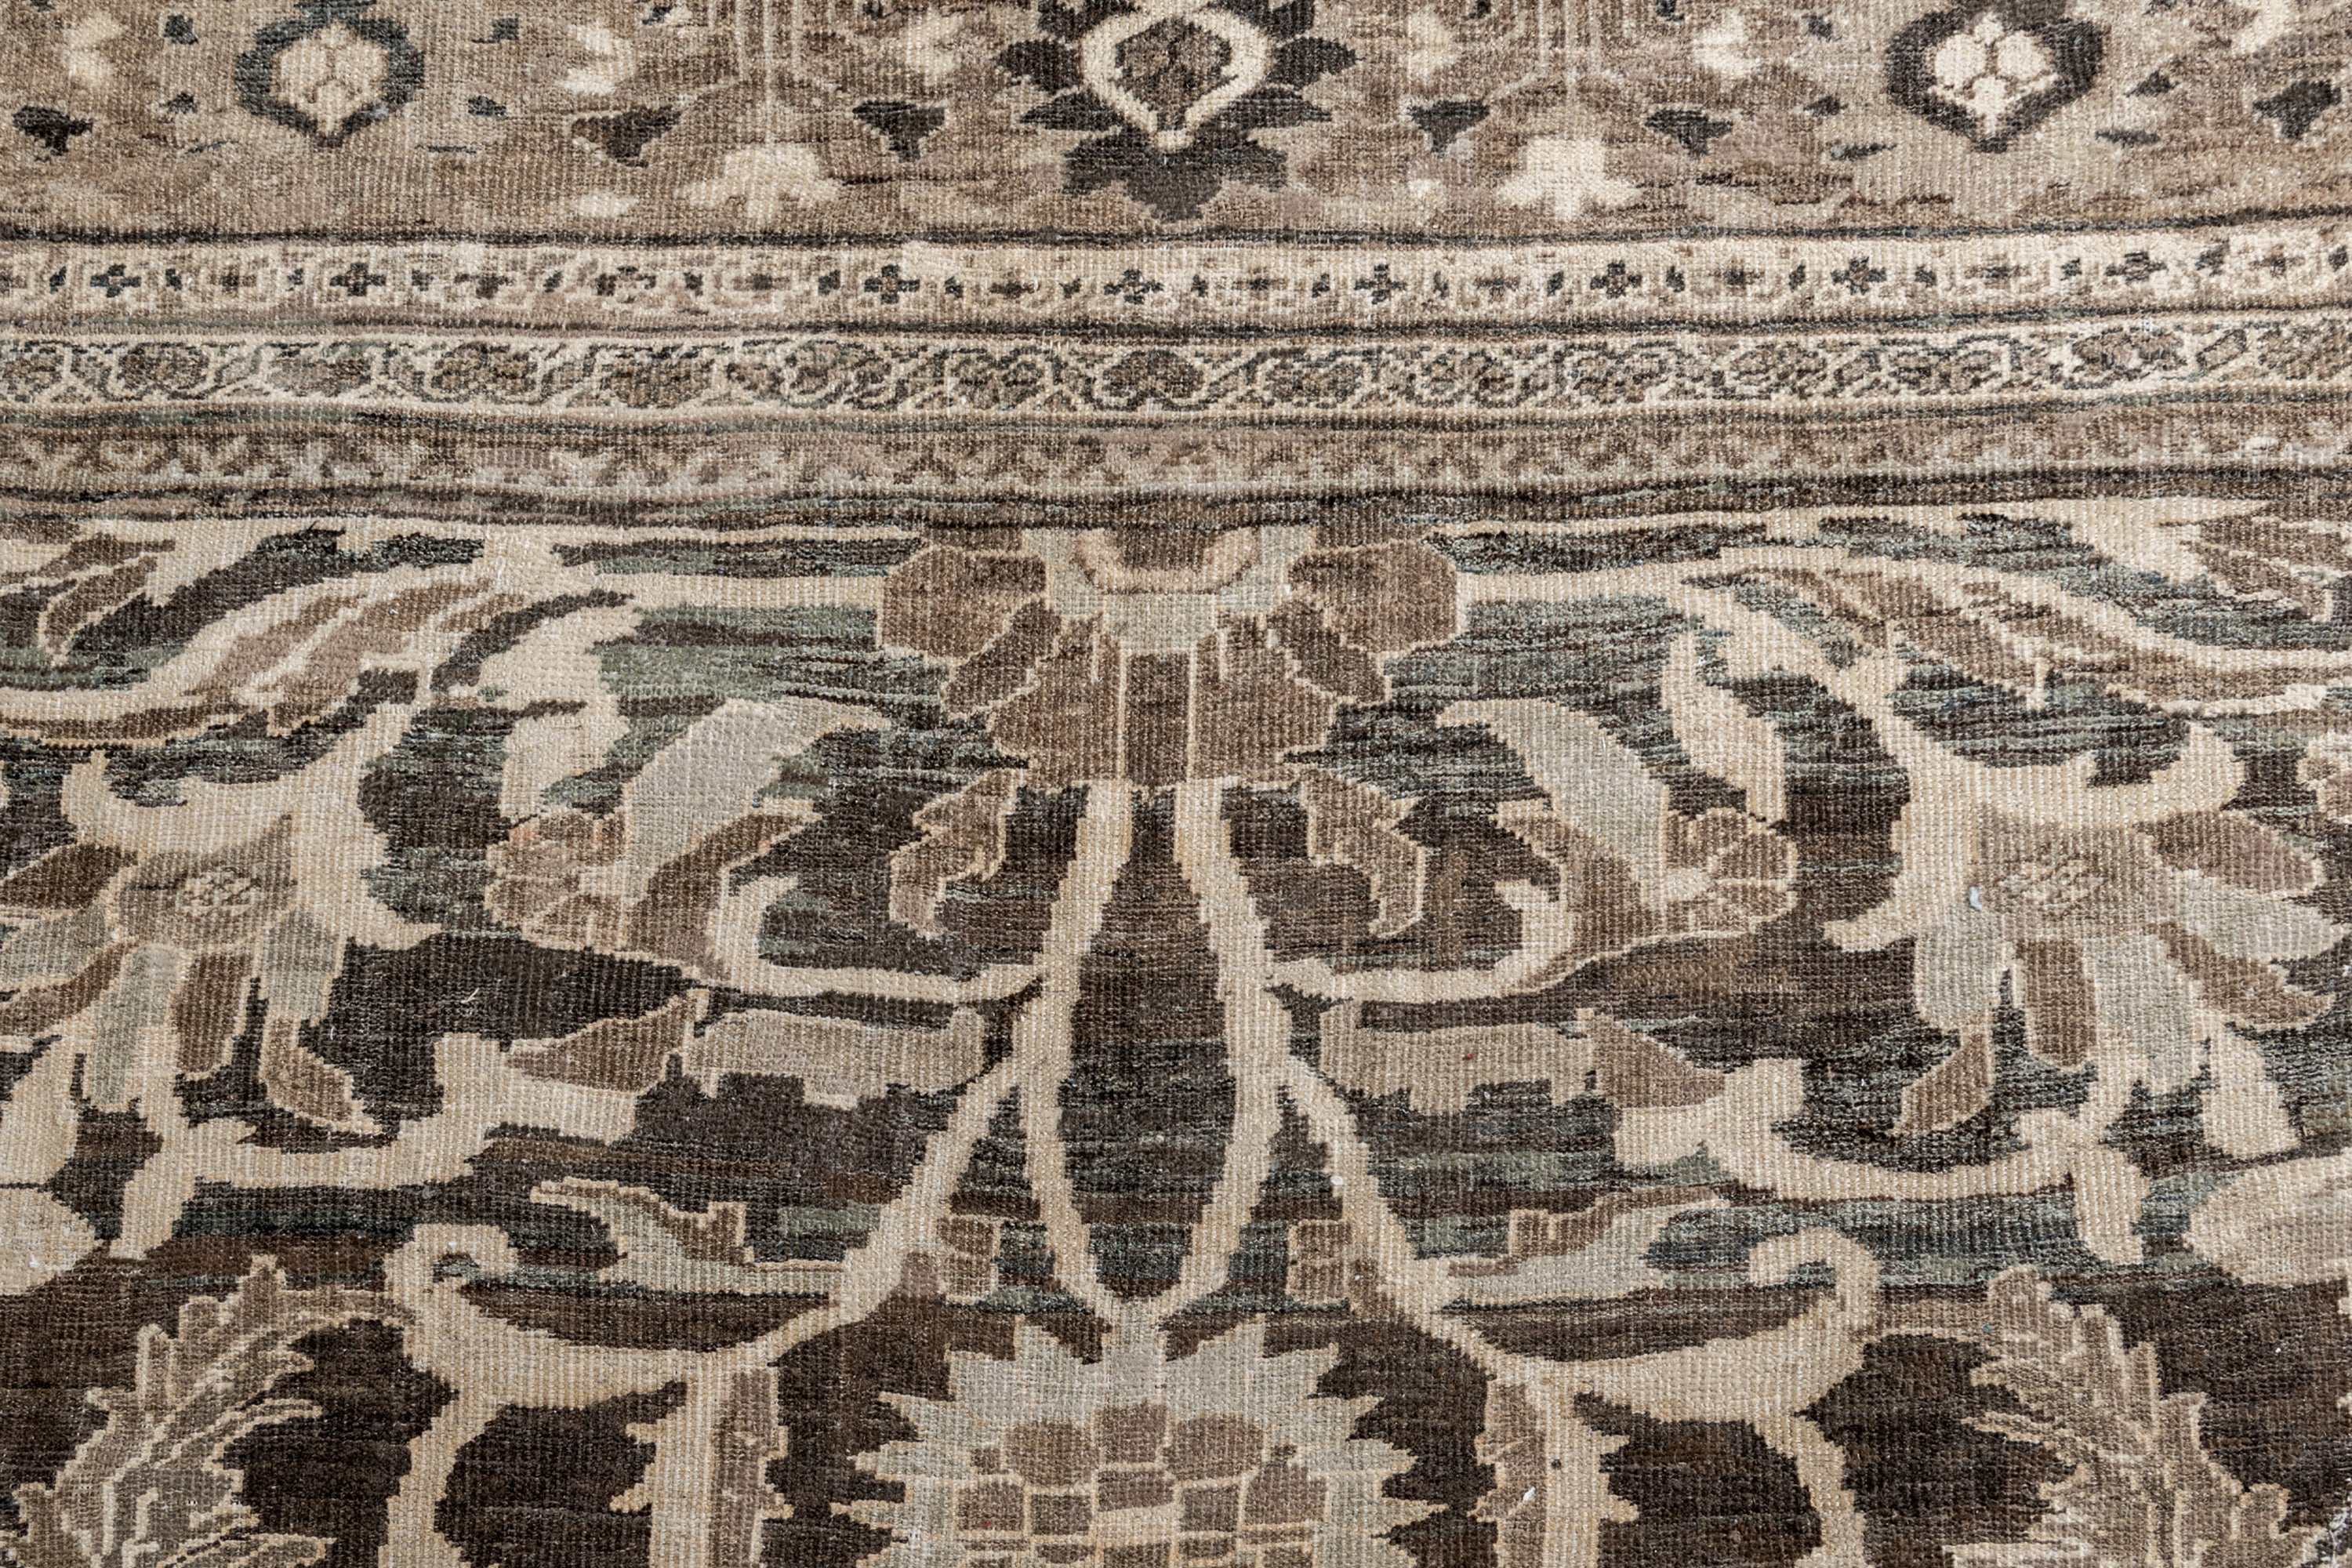 SULTANABAD RUG, AR31074/6739, WEST PERSIA, 13'10" X 19'9" - thumbnail 5